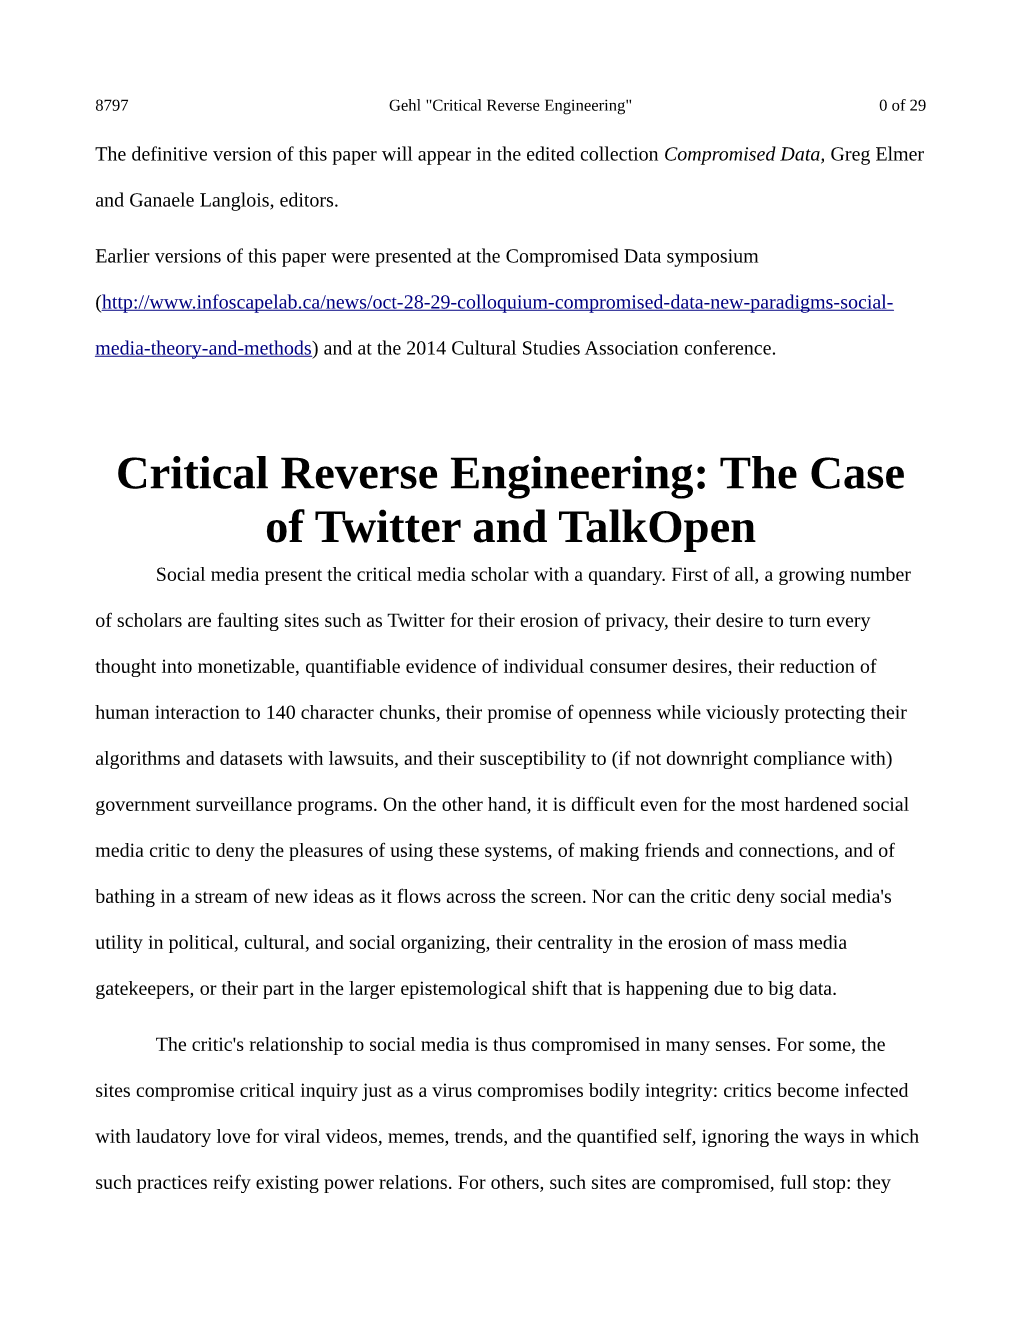 Critical Reverse Engineering" 0 of 29